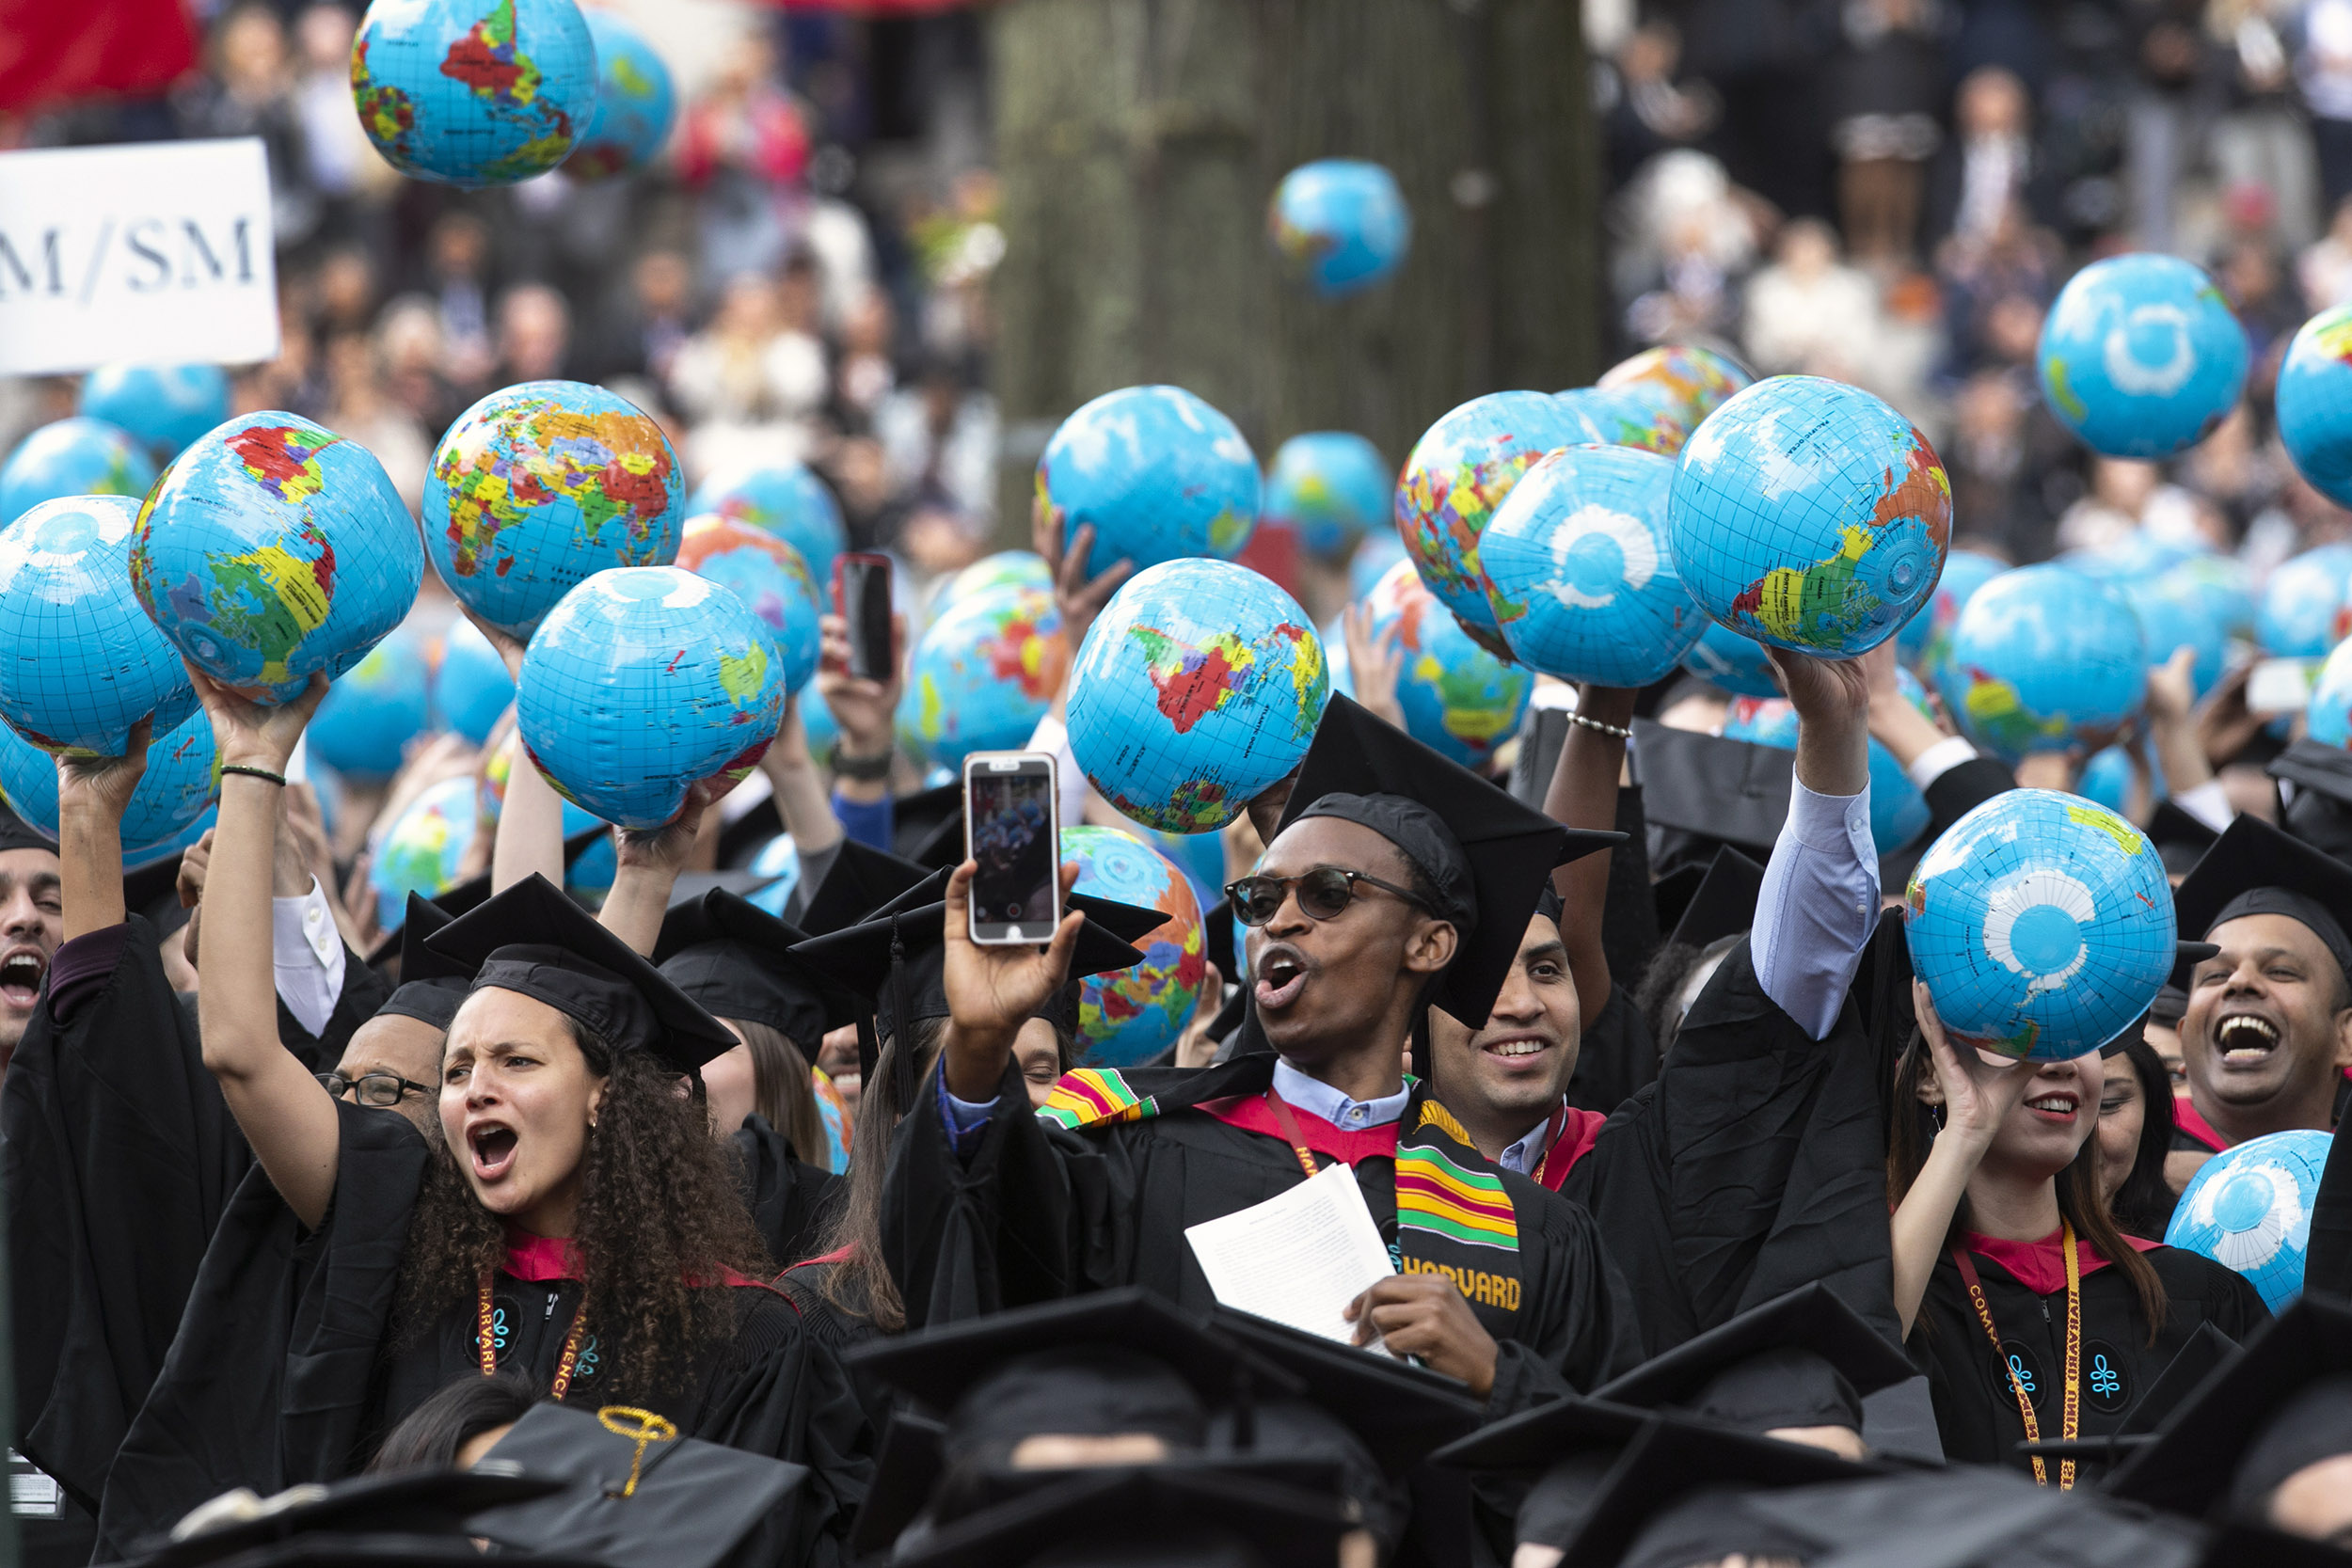 Kennedy School of Government graduates wave inflatable globes.